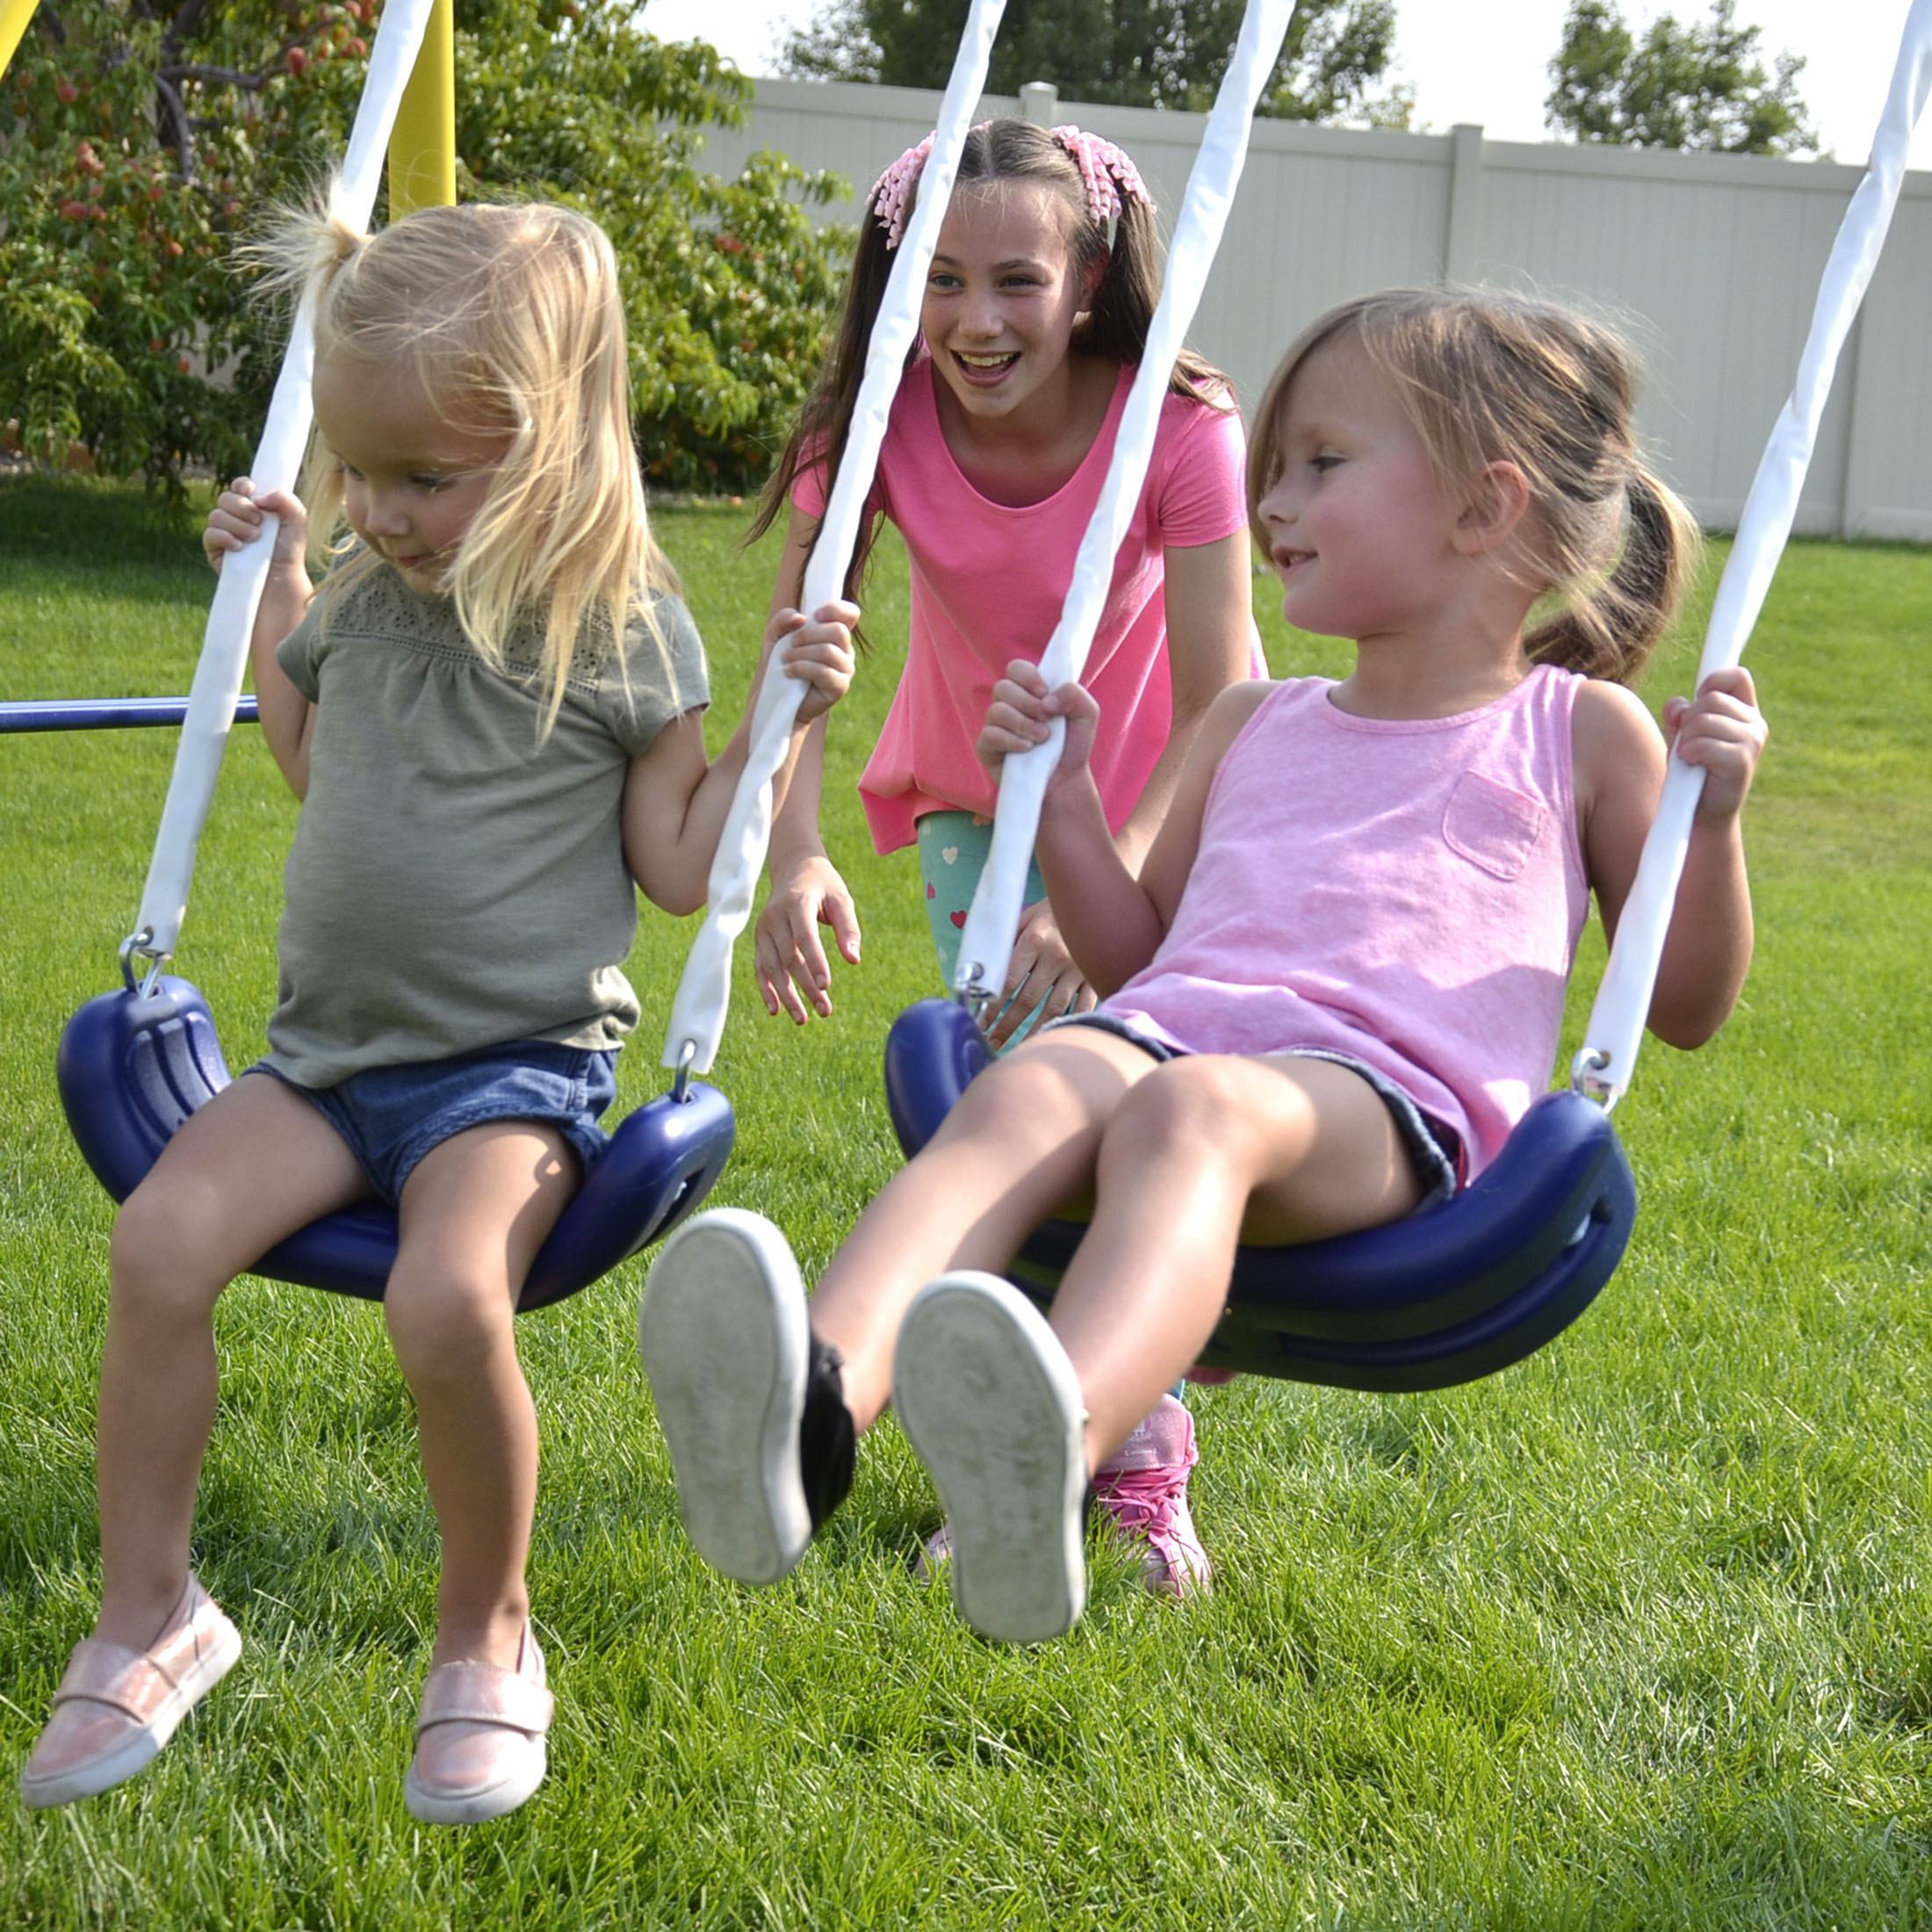 Sportspower Power Play Time Metal Swing Set with 2 Swings and Lifetime Warranty on Blow Molded Slide - image 5 of 10